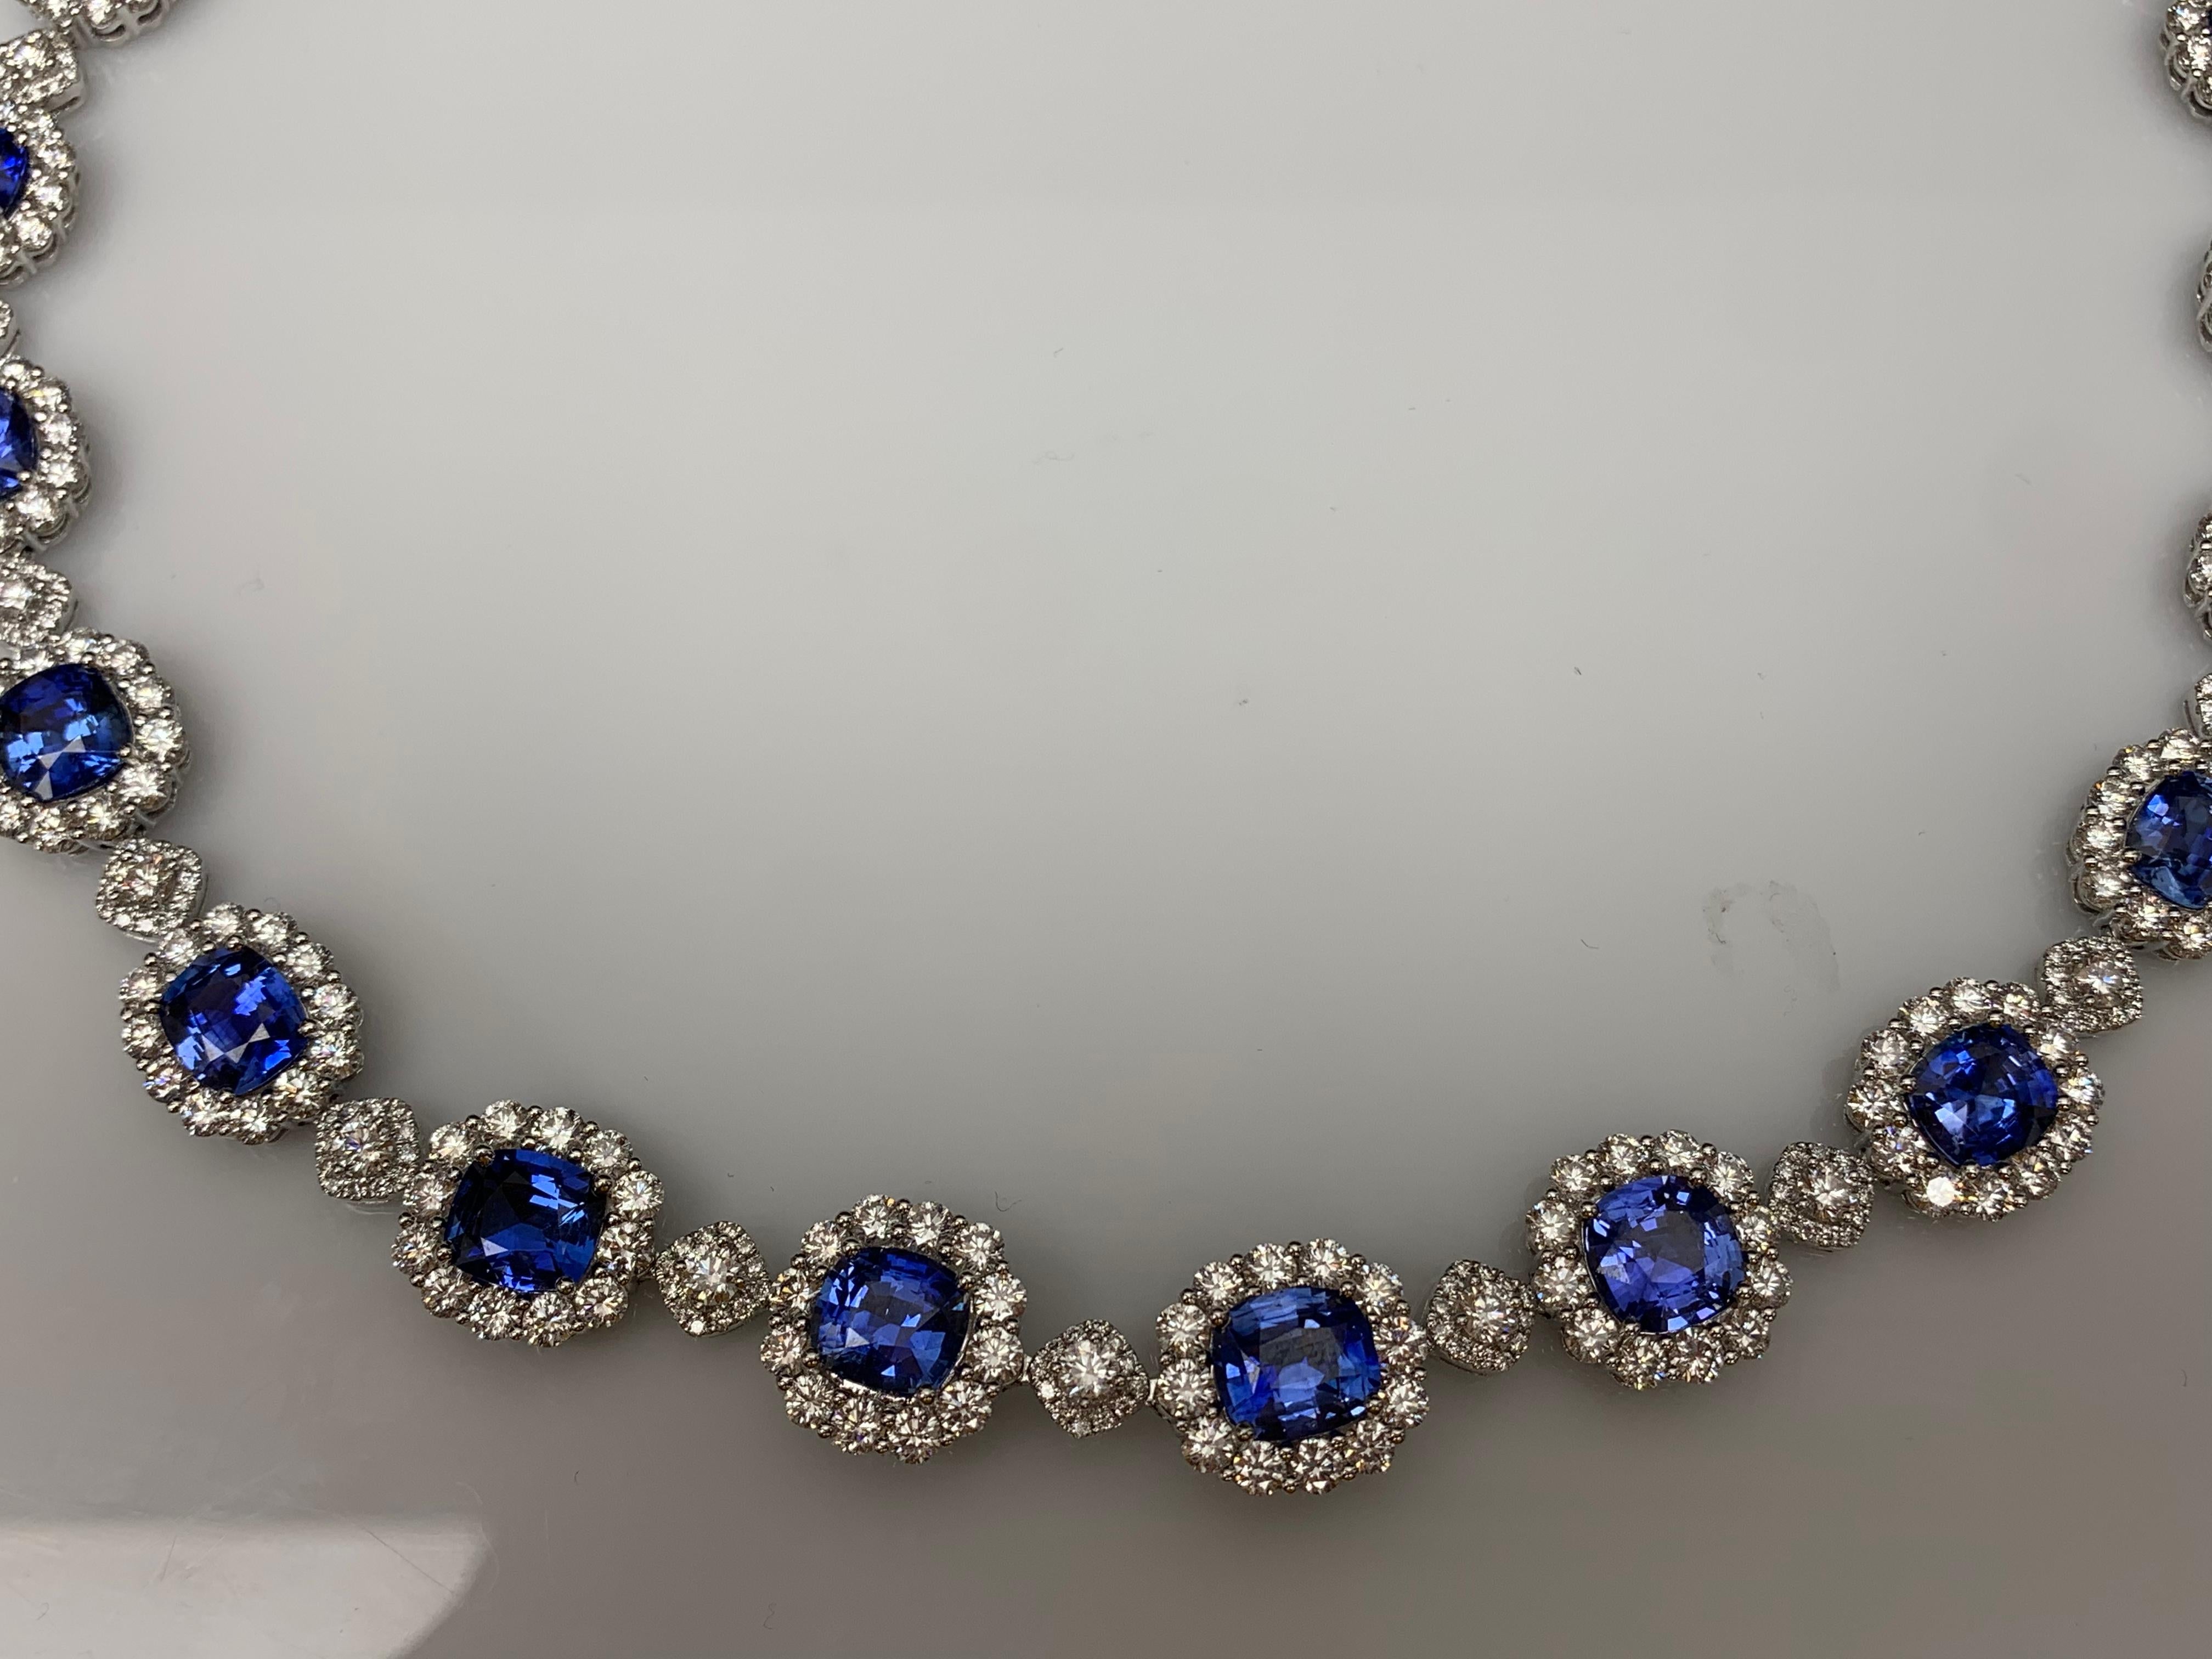 35.11 Carat Cushion Cut Blue Sapphire and Diamond Necklace in 18K White Gold For Sale 7